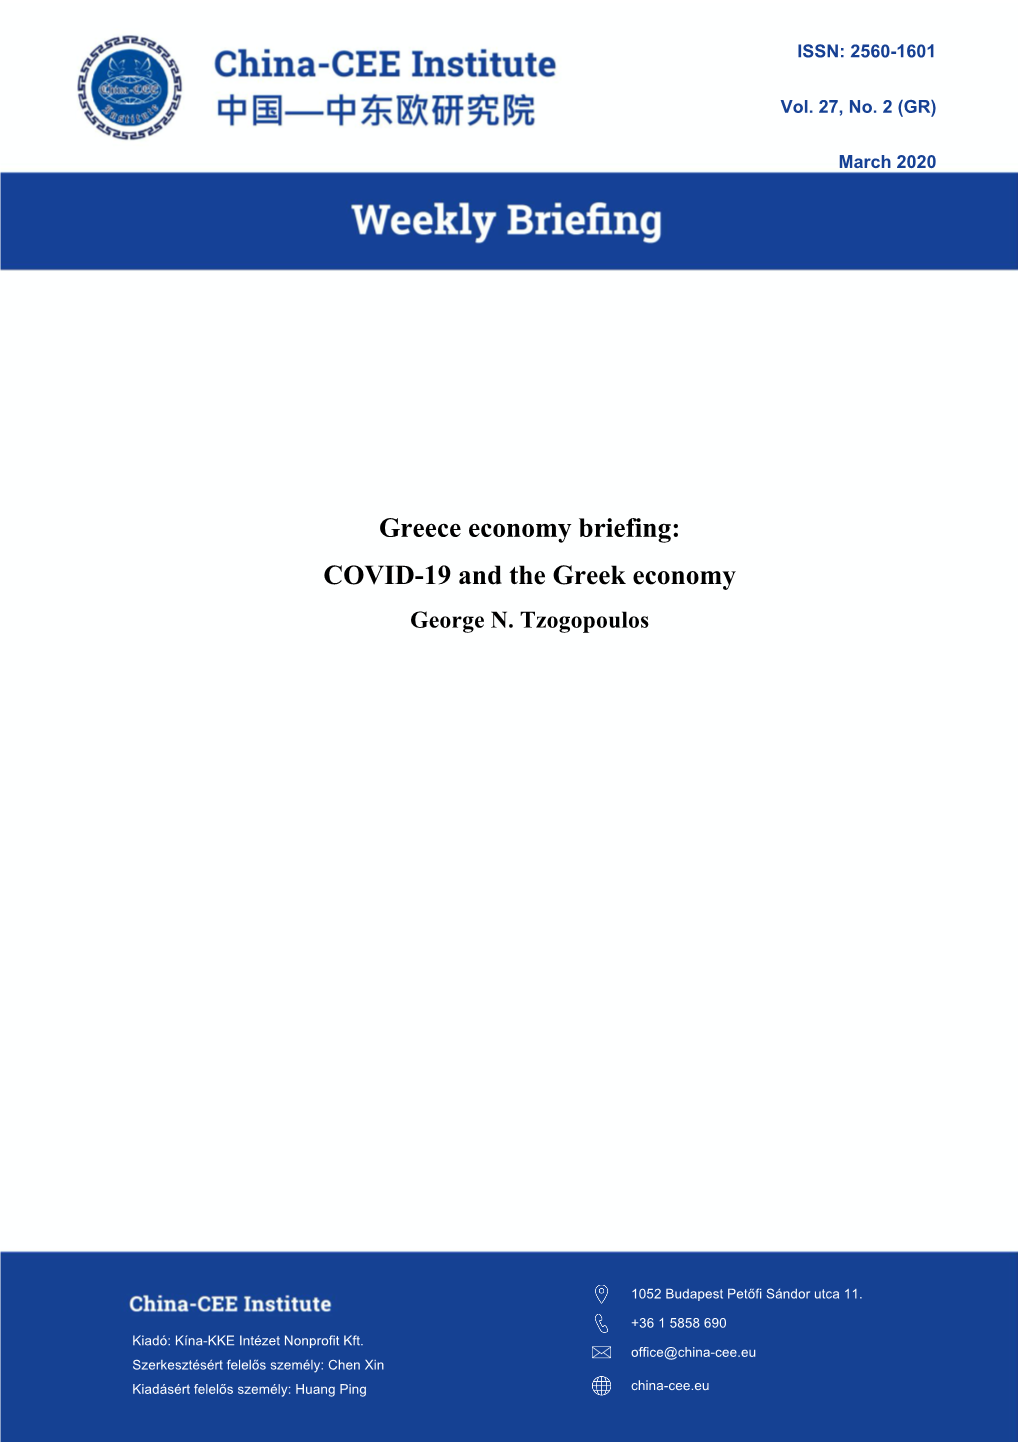 Greece Economy Briefing: COVID-19 and the Greek Economy George N